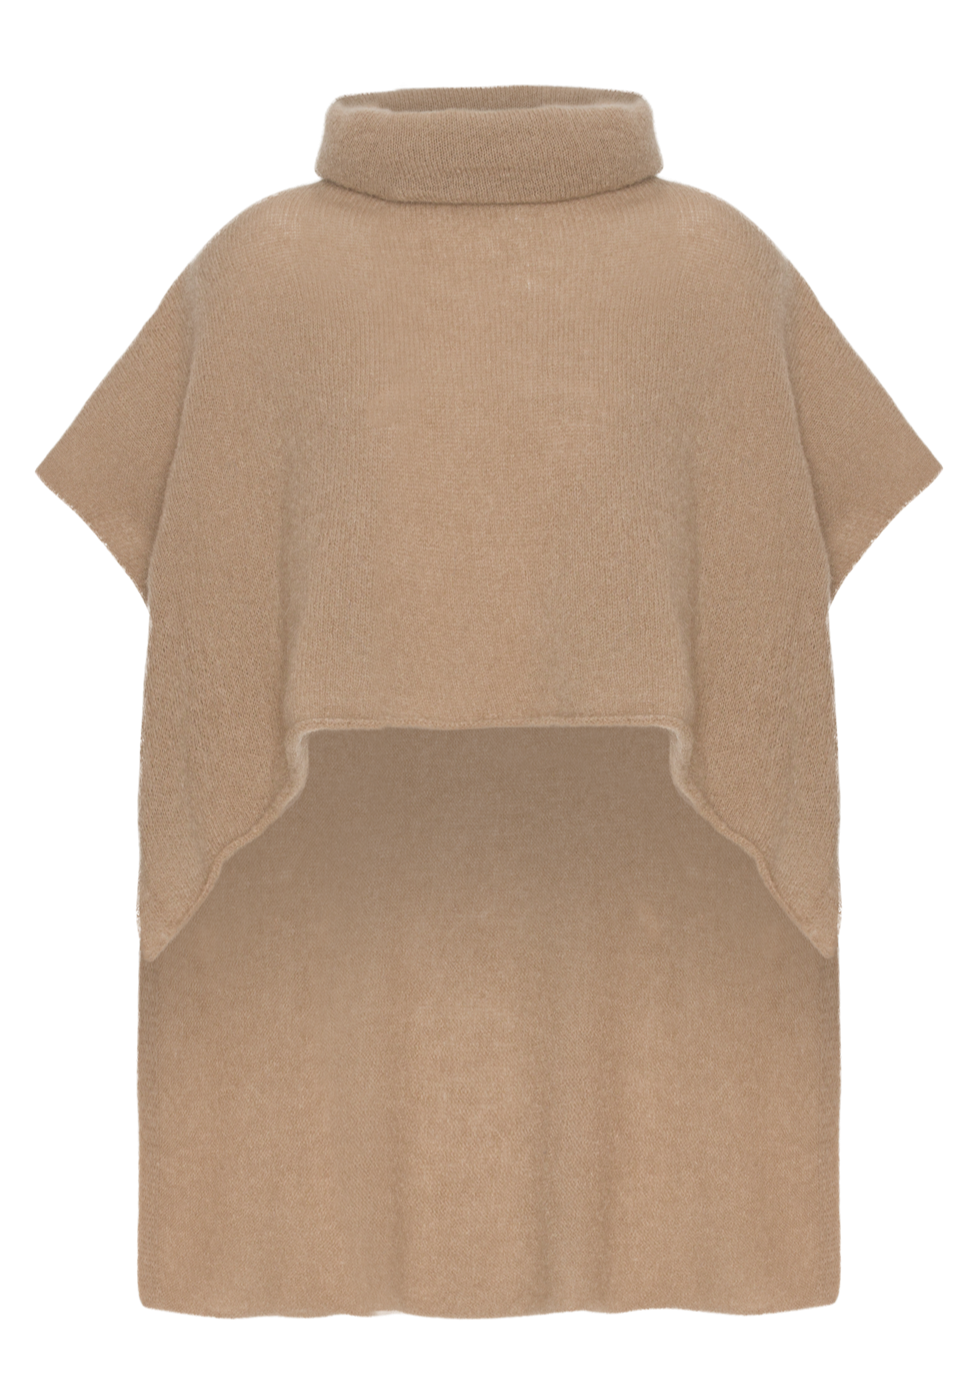 JERSEY PONCHO BEIGE MOHAIR